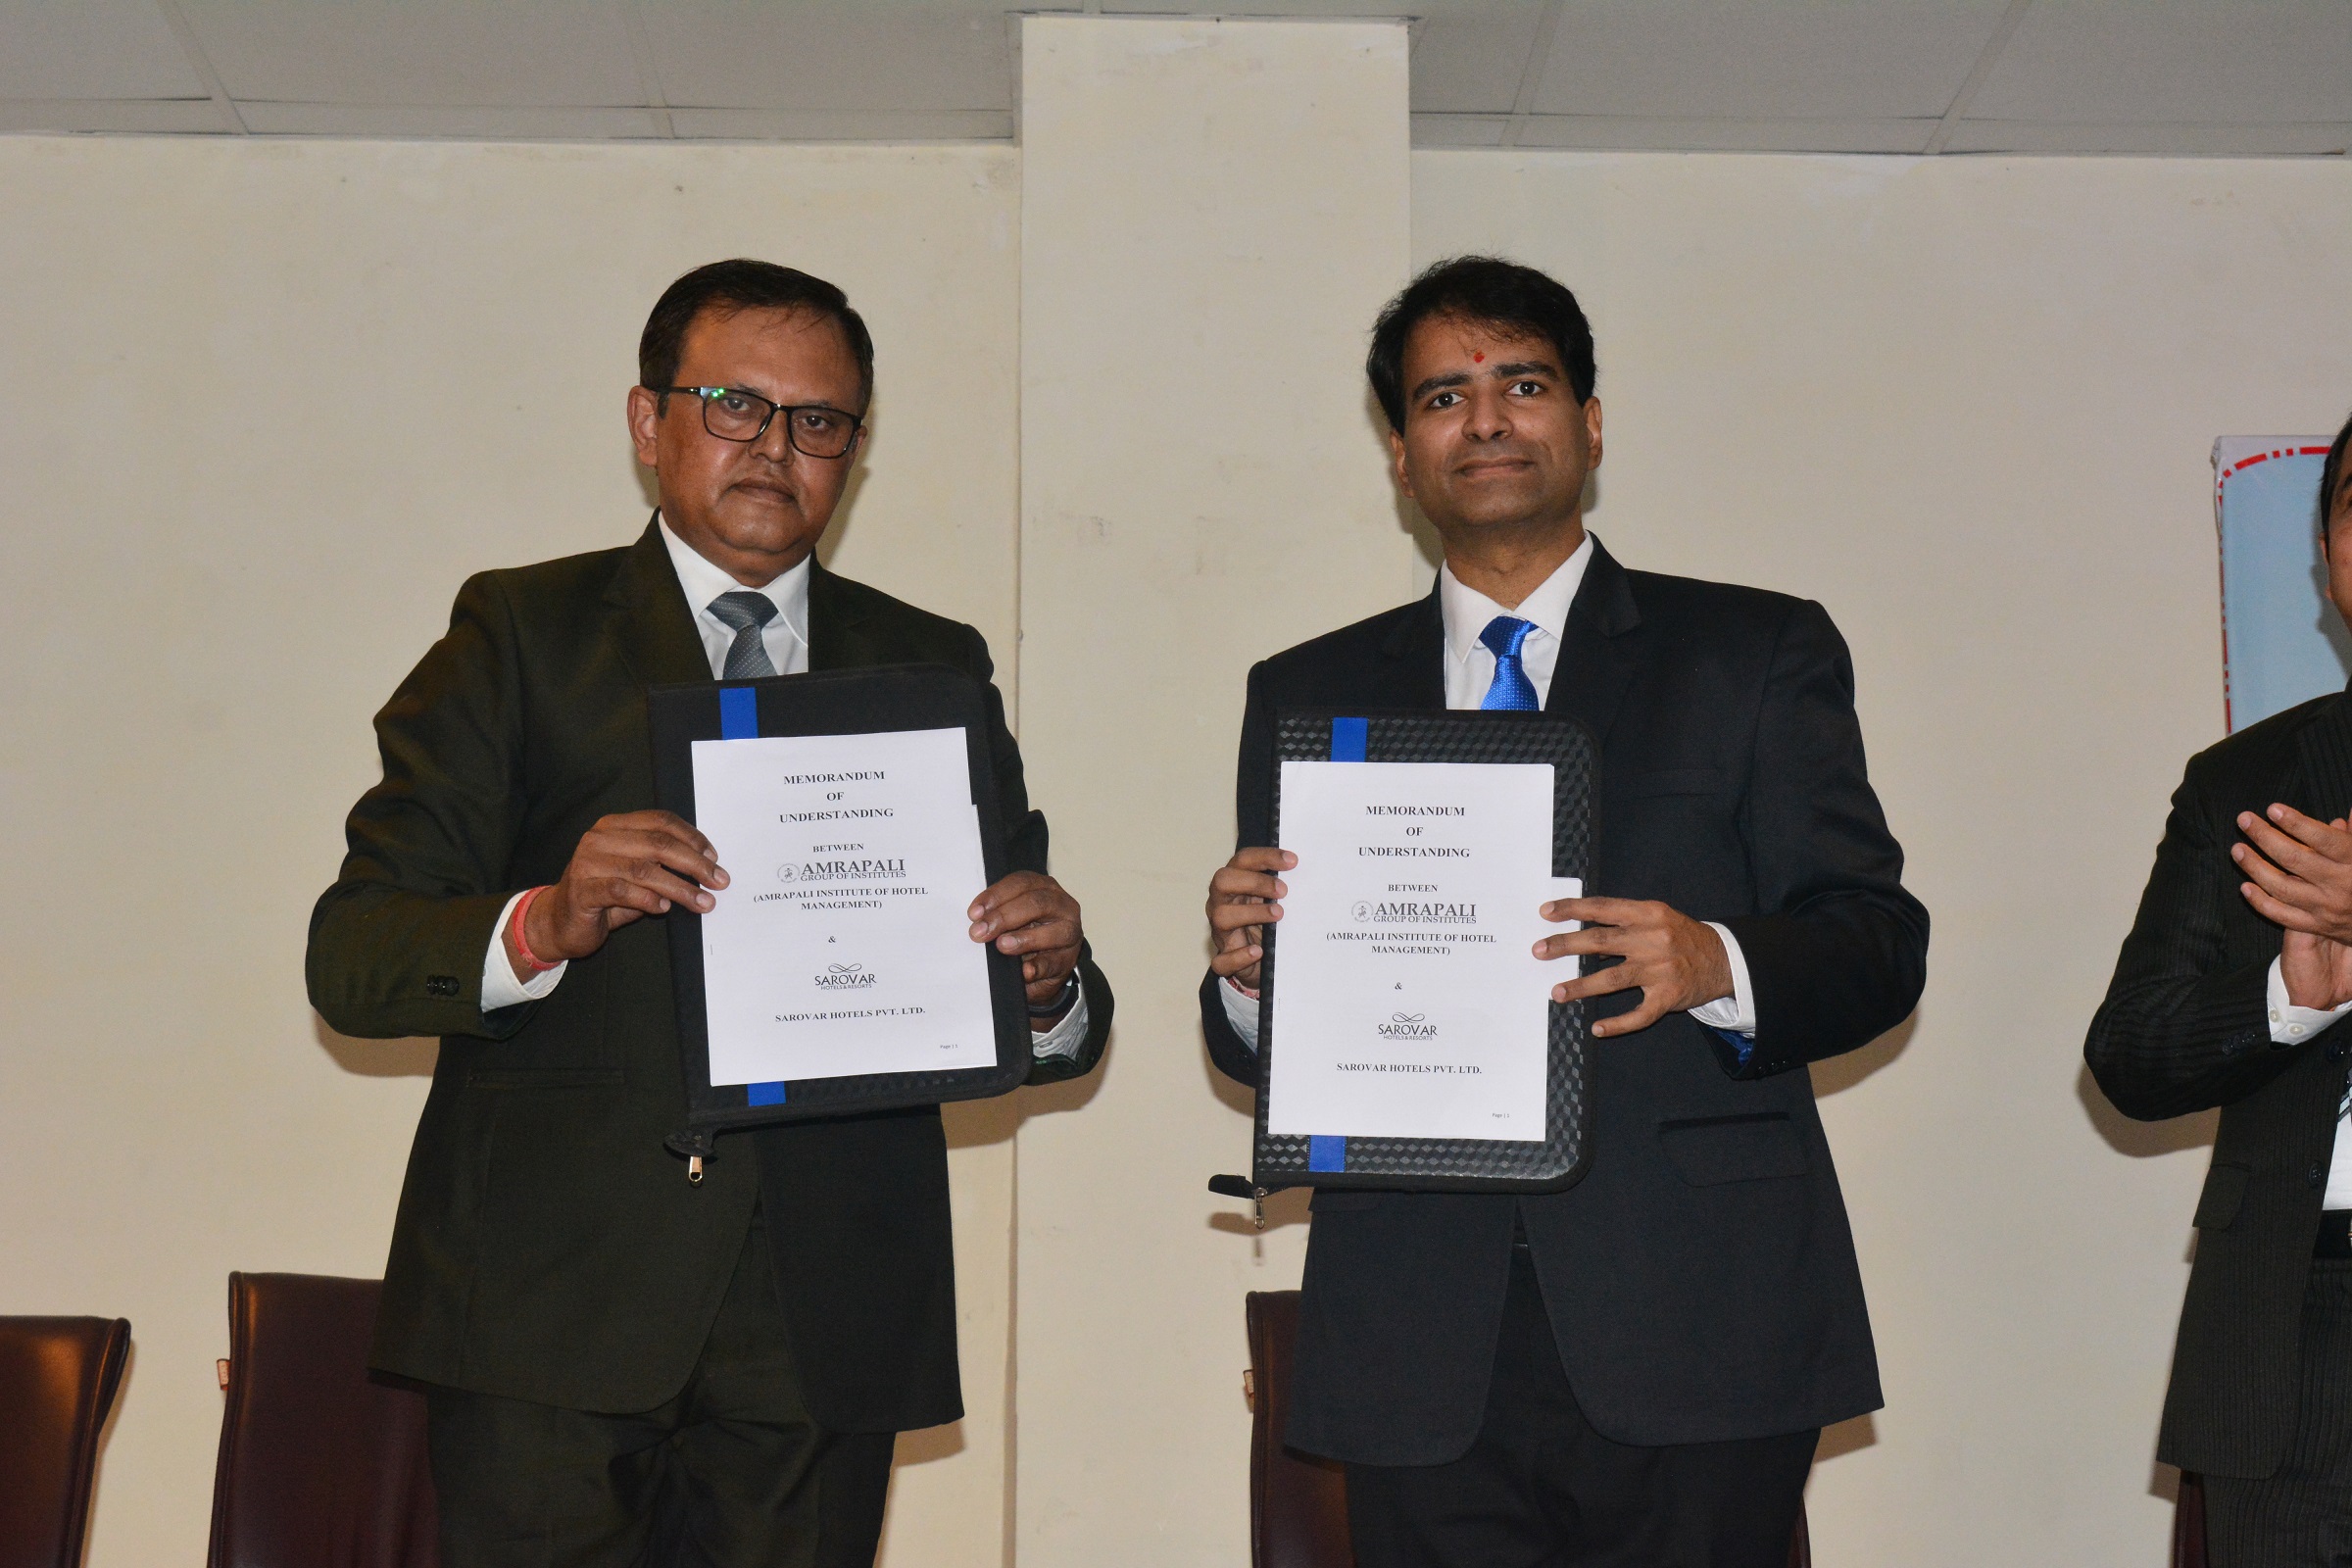 Sarovar Hotels signs an MOU with Amrapali Institute of Hotel Management to mentor young hospitality aspirants